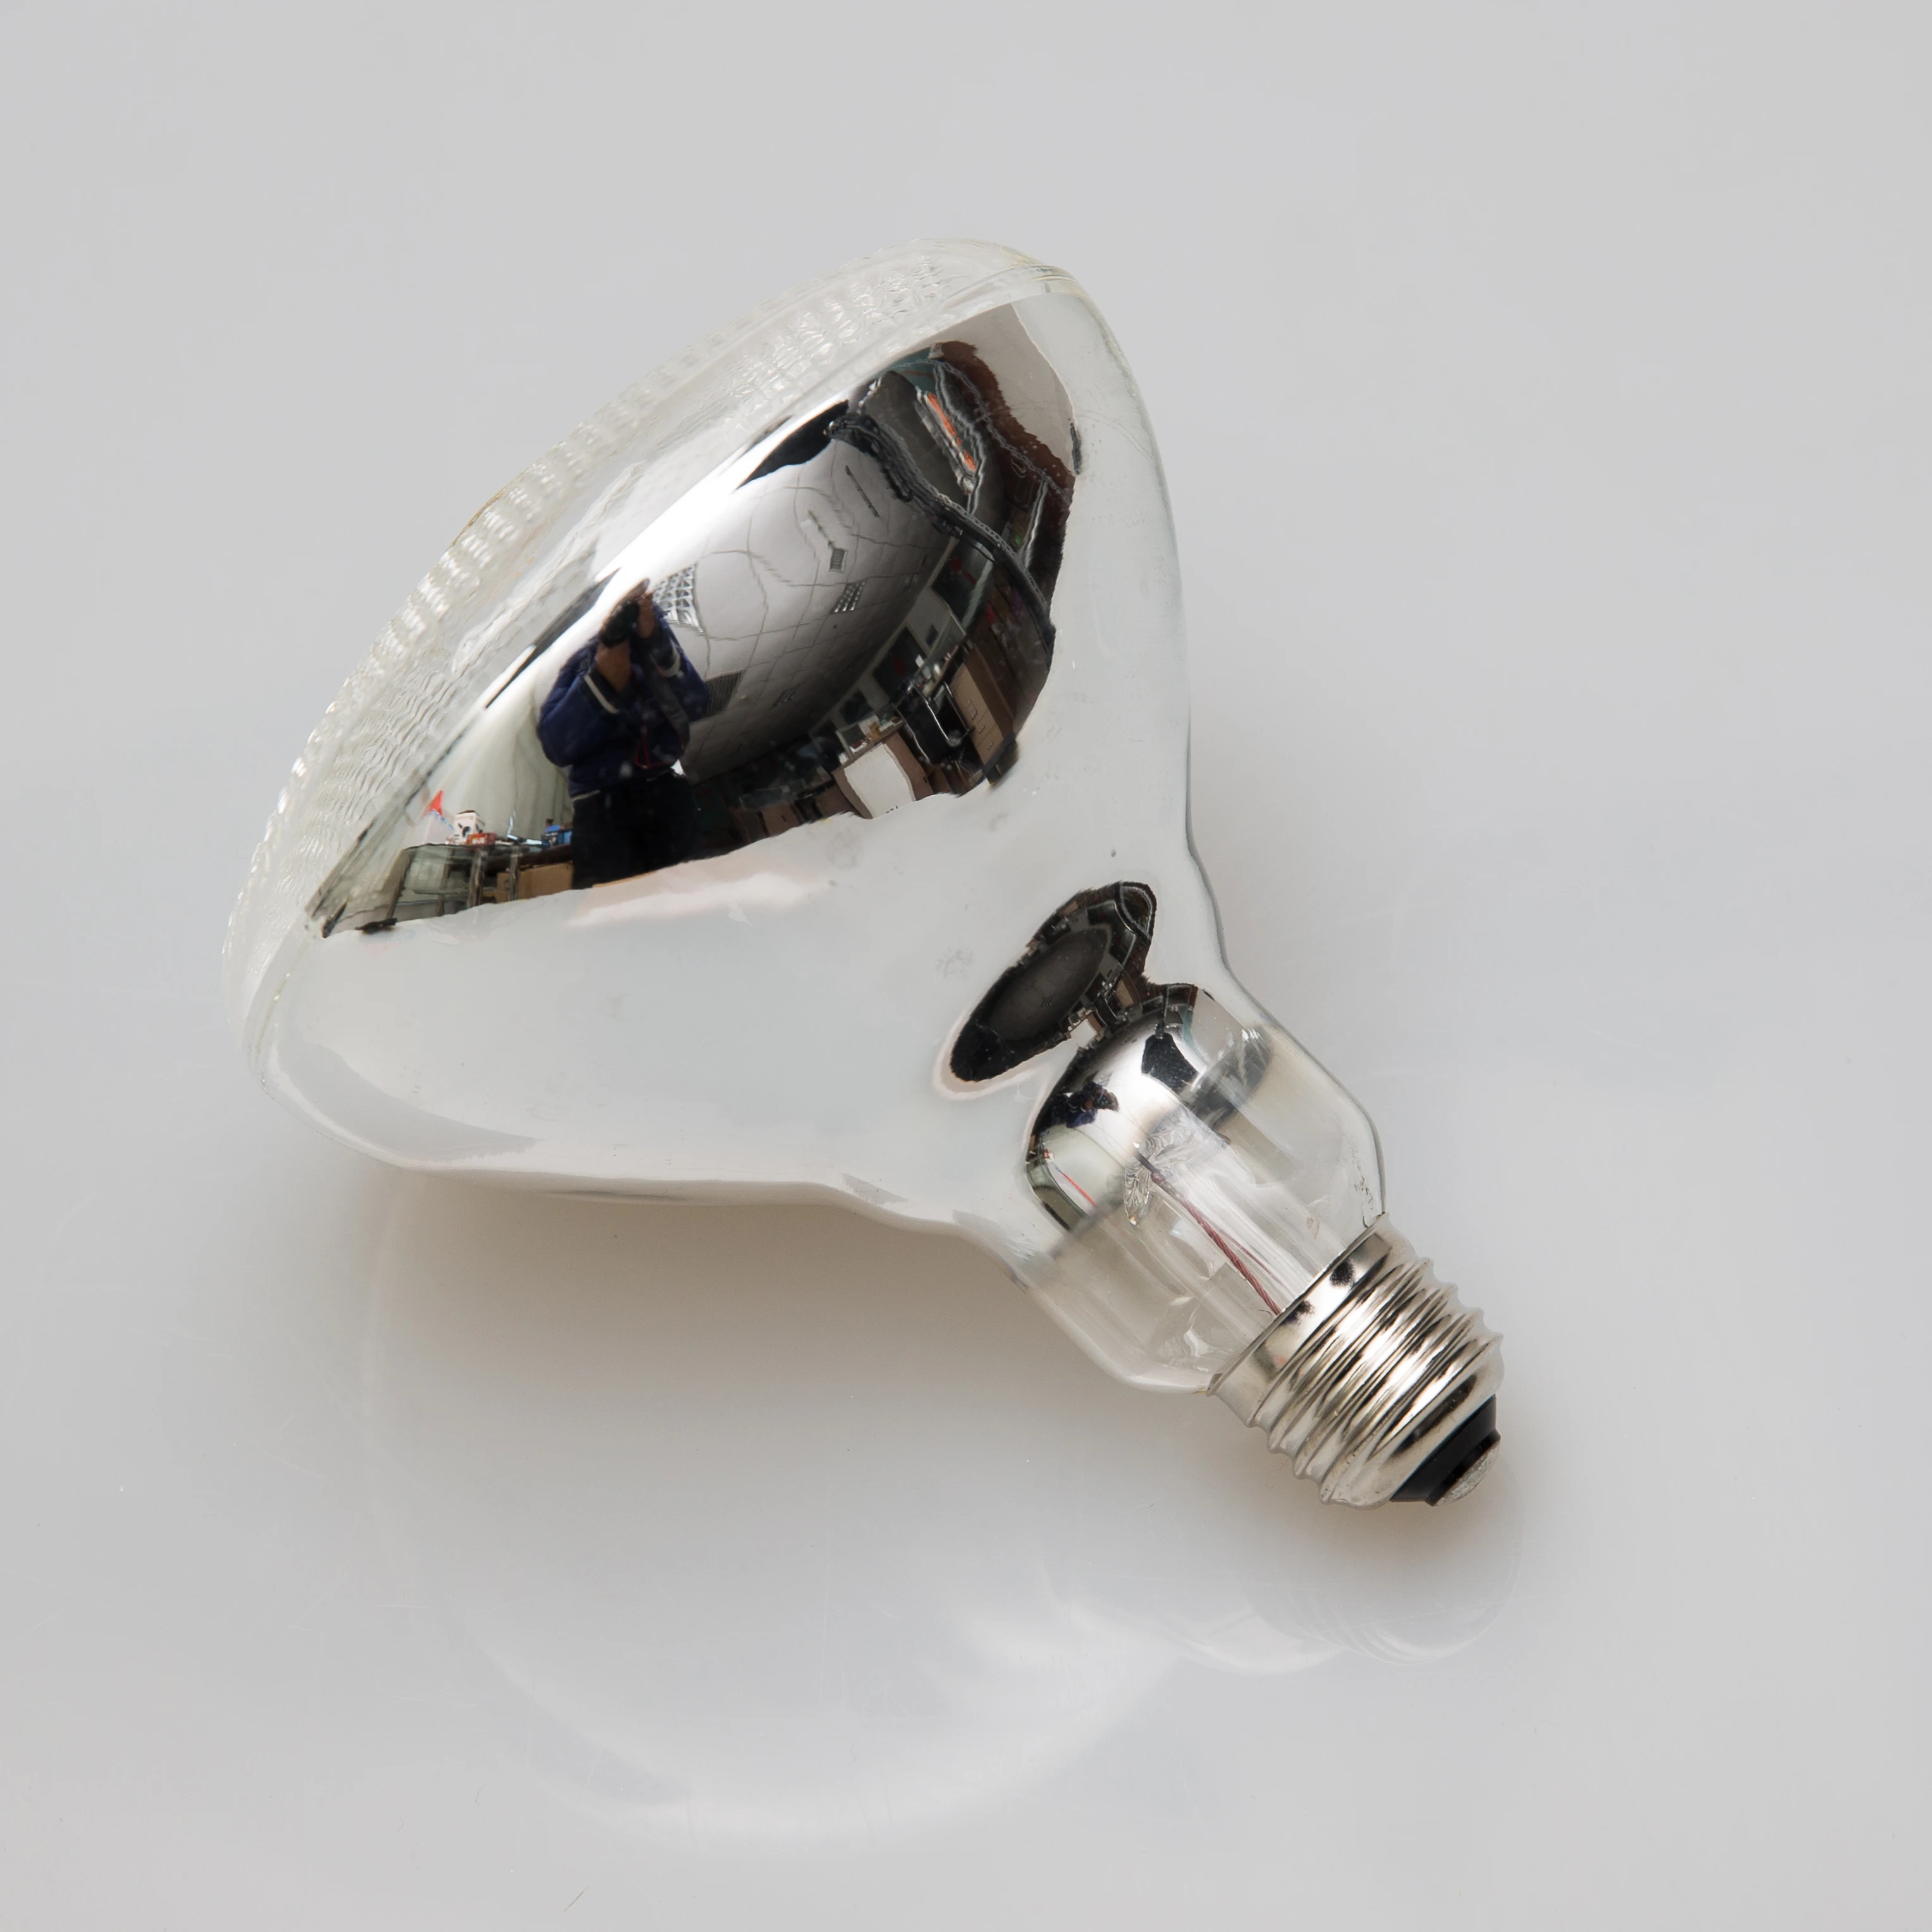 infrared lamp 110V PAR38 Tungsten  Lamp 100W E27 manufactory for animal,plant,heat food SPOT